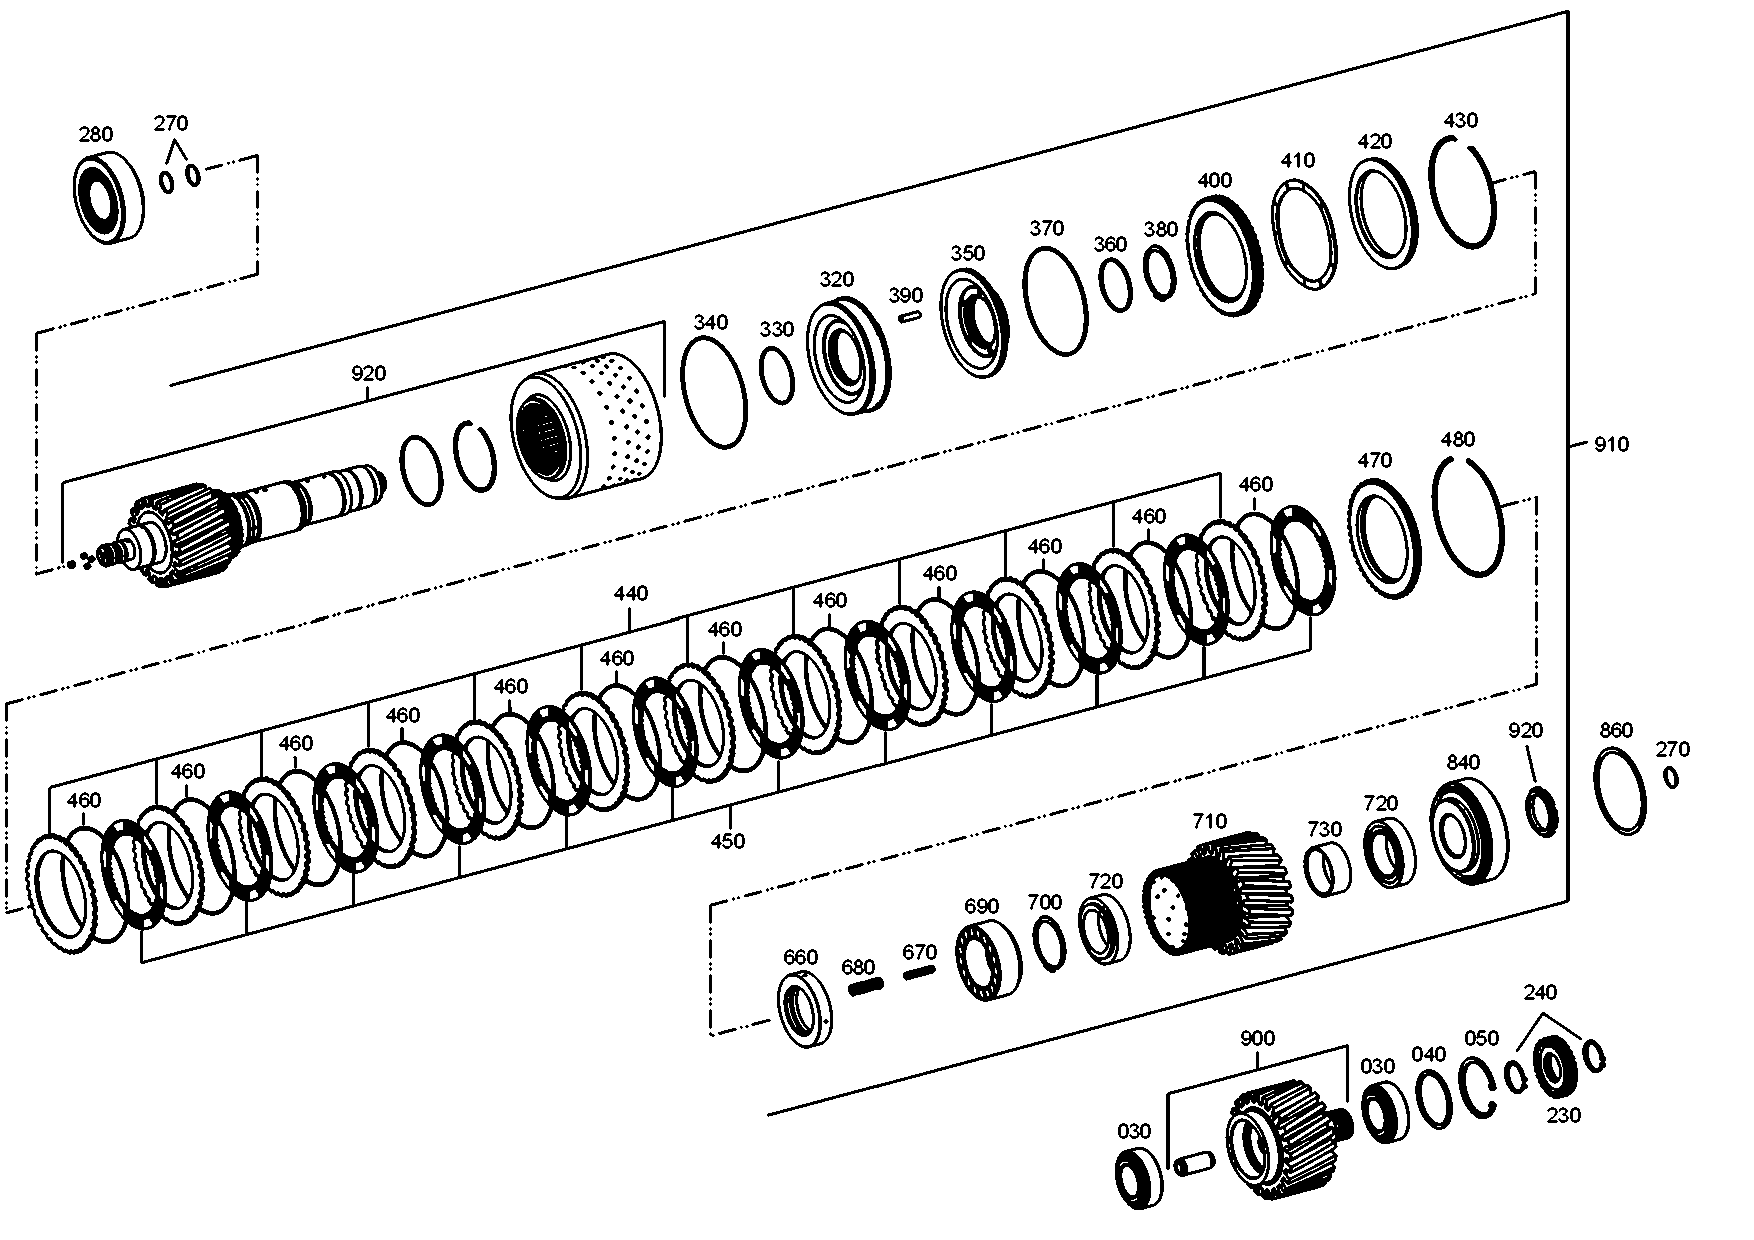 drawing for CLAAS CSE 25017490 - ANNULAR CYLINDER (figure 3)